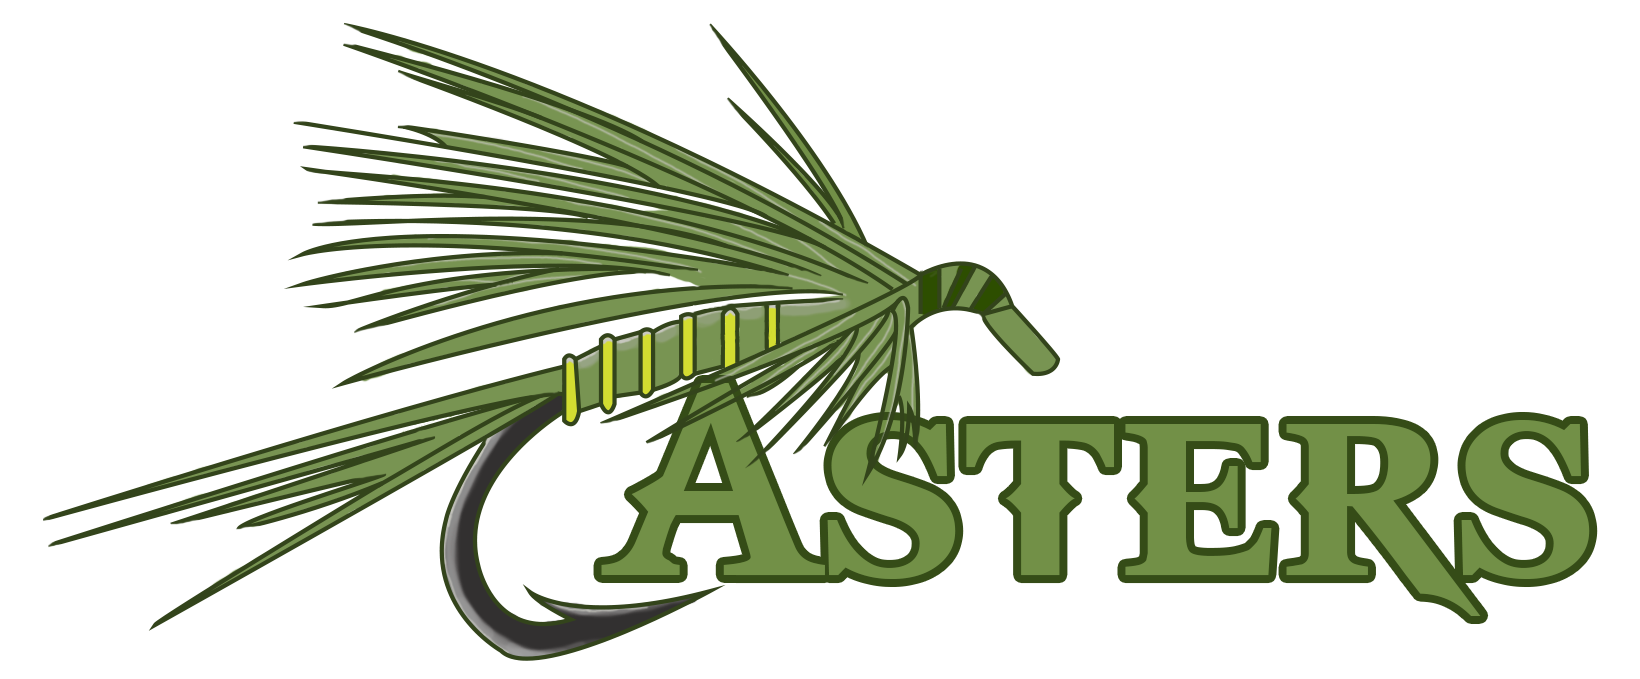 Casters Online Fly Shop, FREE STANDARD US SHIPPING FOR ORDERS OVER $16.95,  Fly Fishing Supplies, Fly Tying Supplies & Materials, Fly Tyers Tools,  Online Fly Shop, Orvis, Hareline Dubbin, Online Fly Fishing